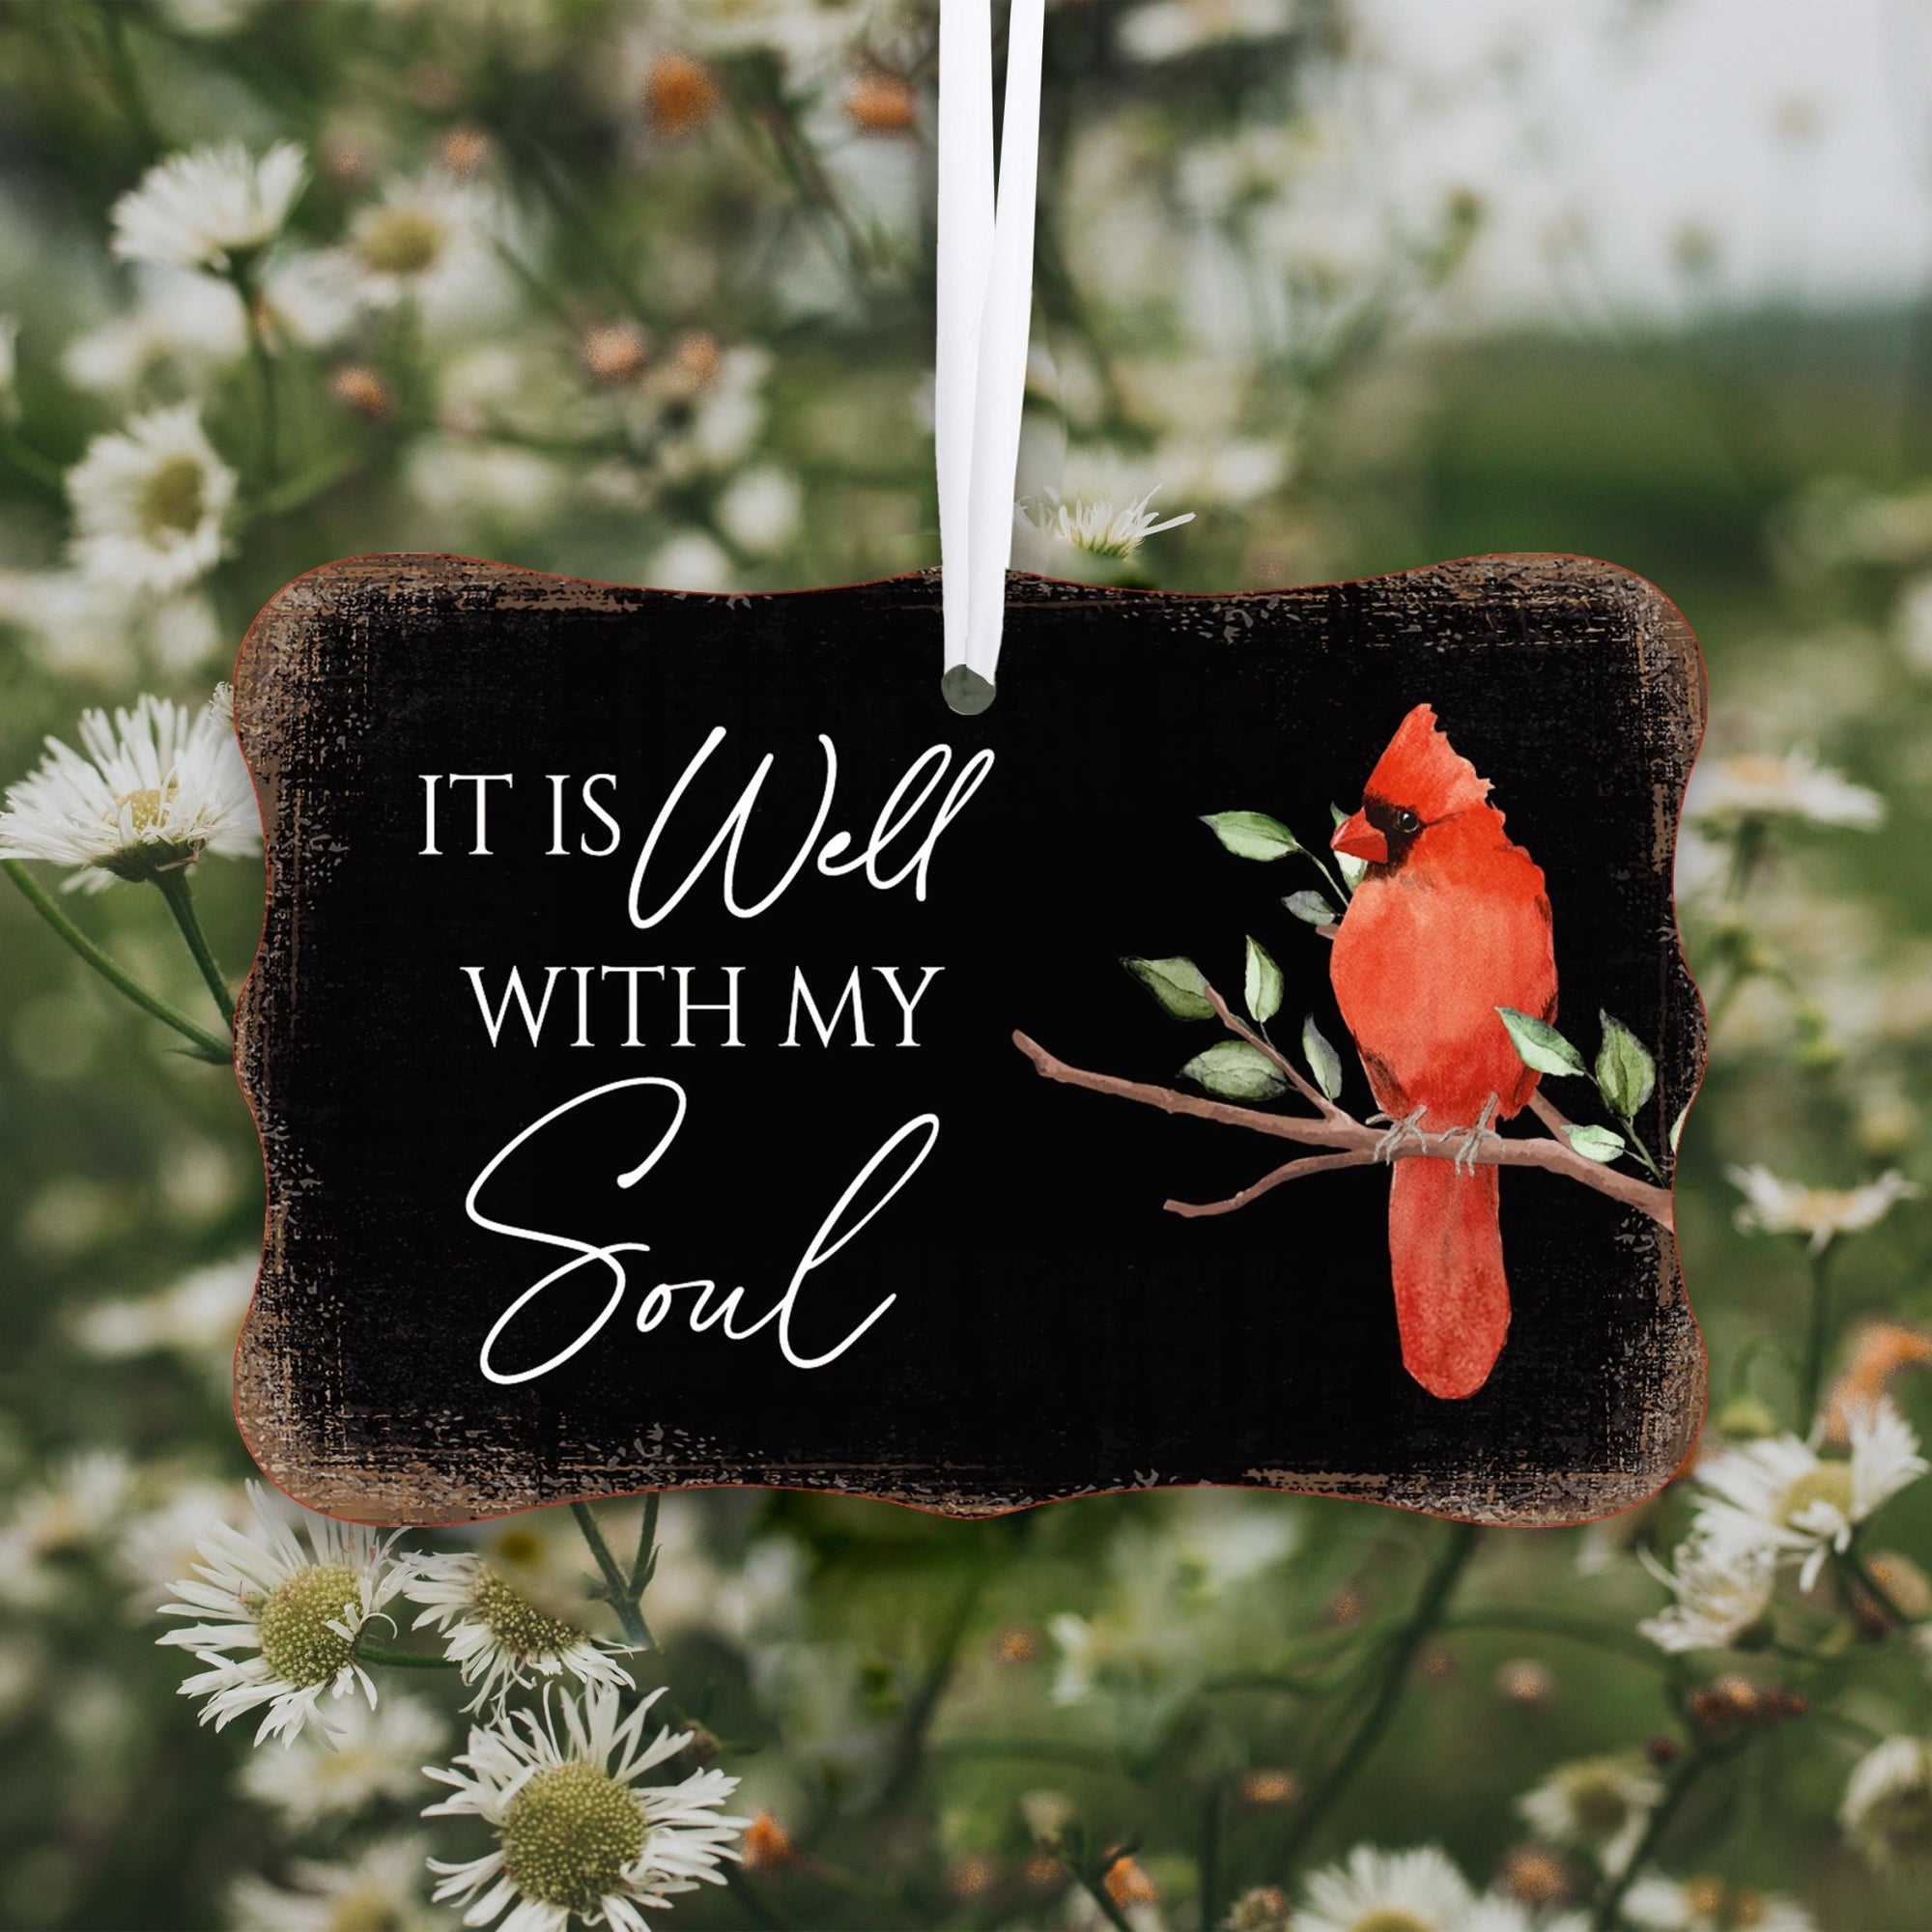 Rustic Scalloped Cardinal Wooden Ornament With Everyday Verses Gift Ideas - It Is Well - LifeSong Milestones